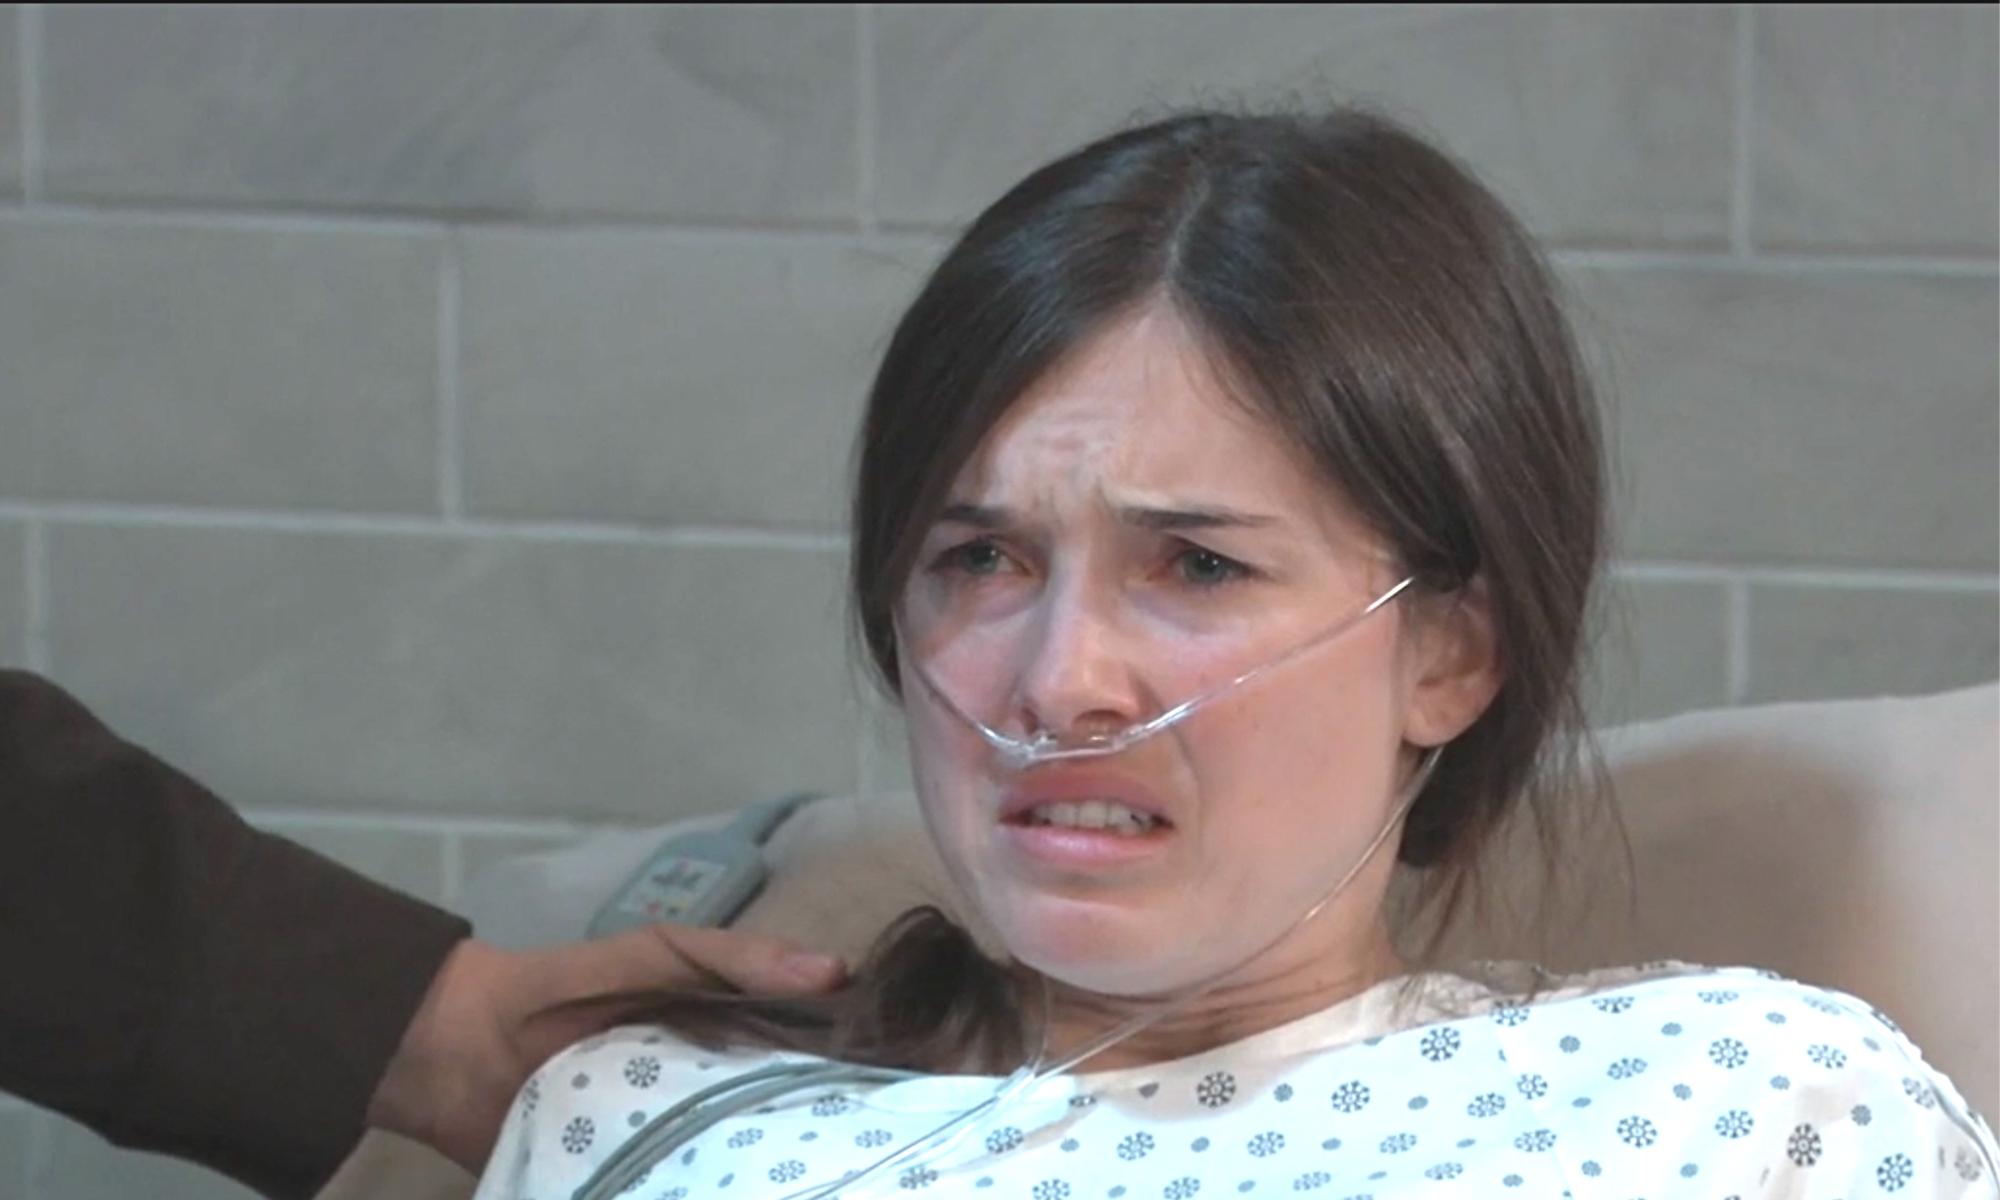 General Hospital Spoilers: Willow Is Horrified To Learn Nina Is Her Mother